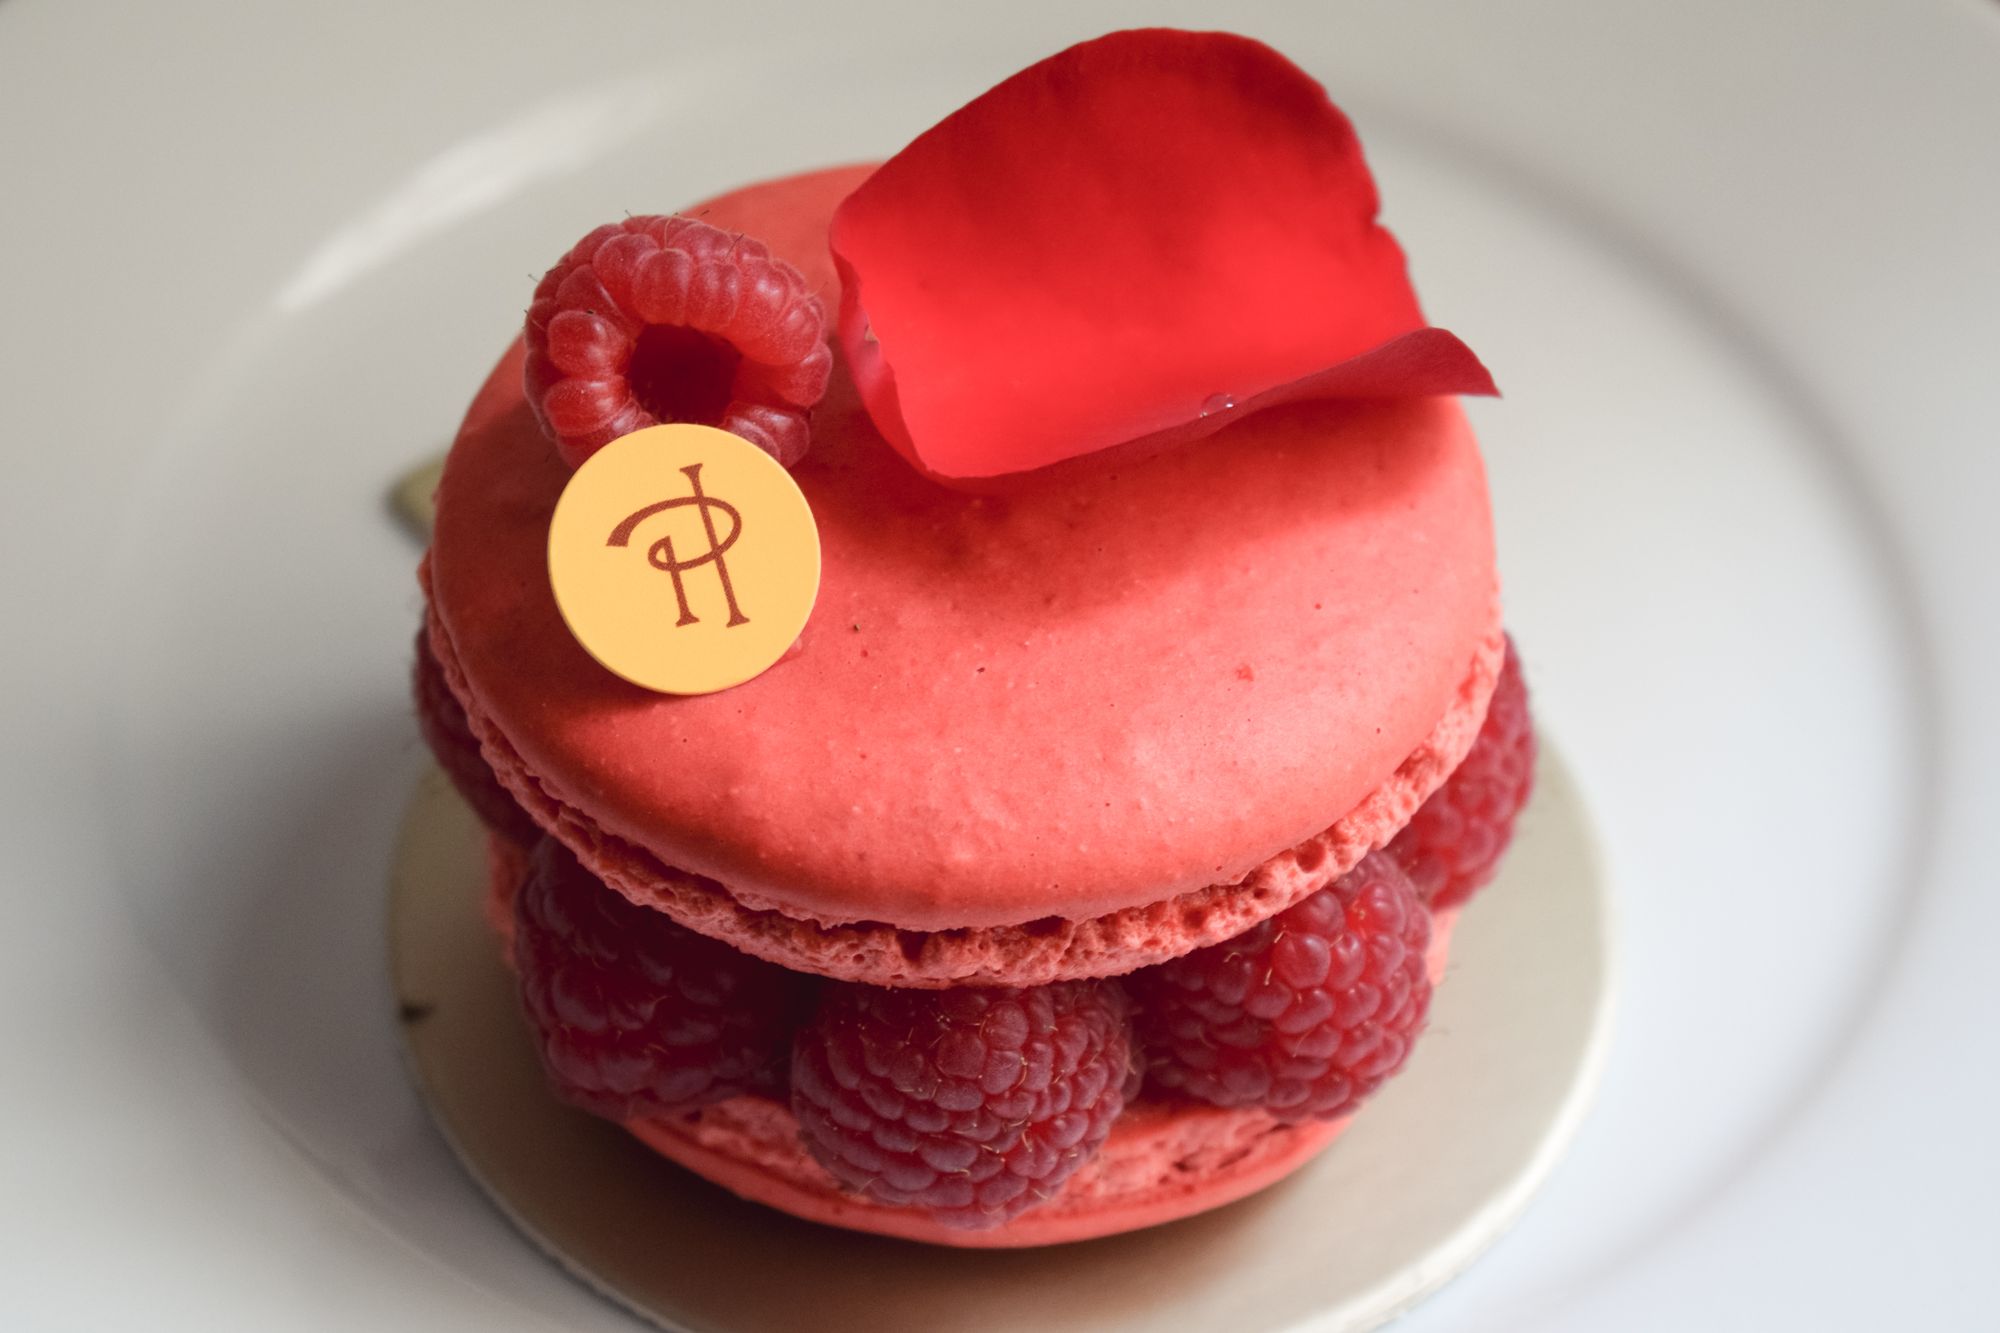 Ispahan Pierre Hermé – French Pastries to Try in Paris